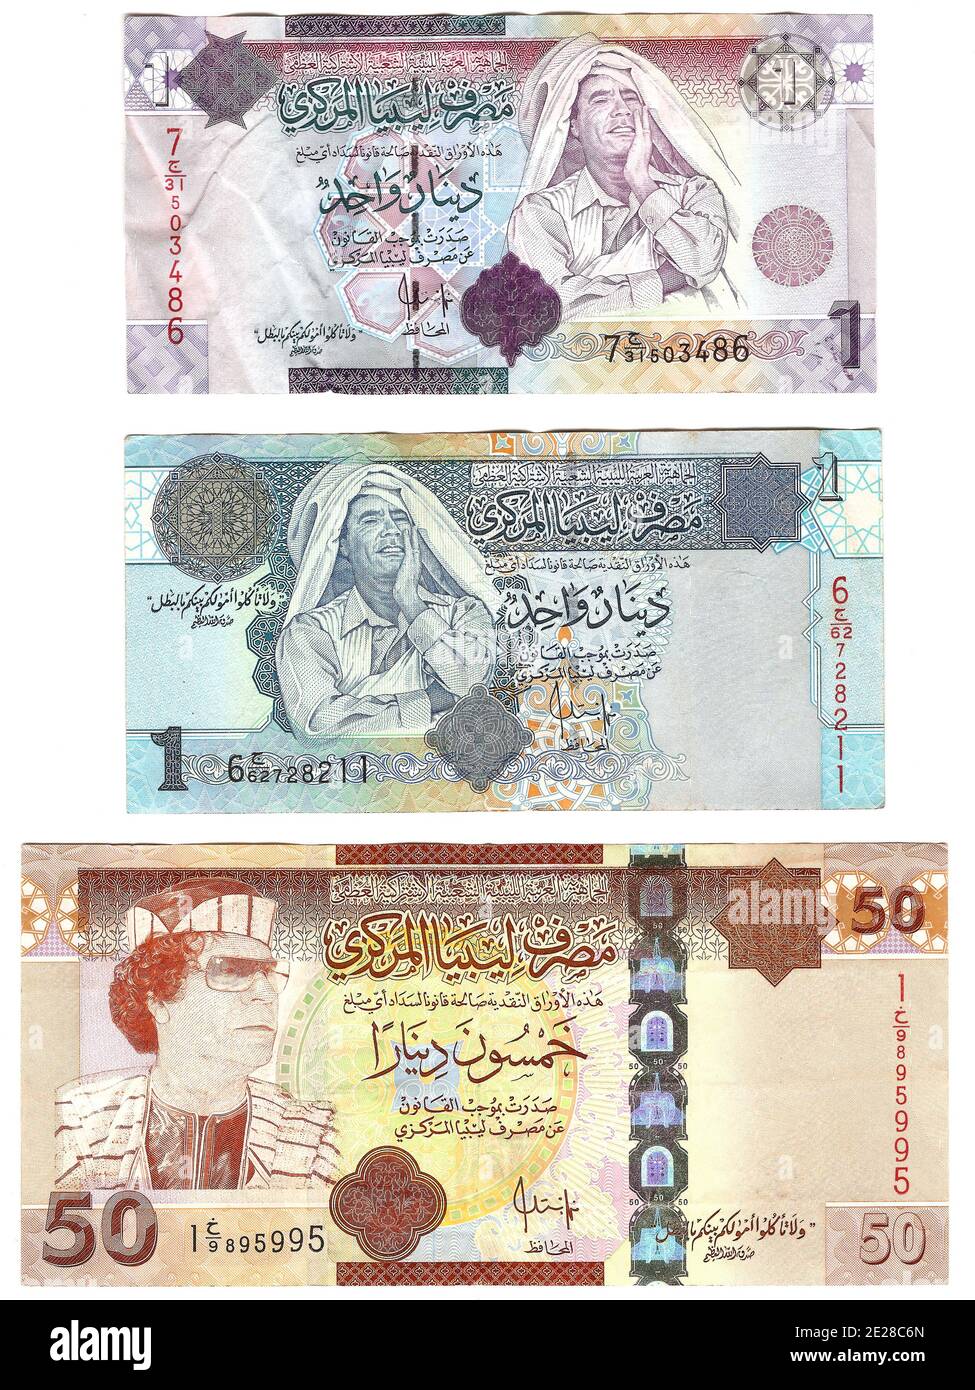 Libyan banknotes of 1 dinar (above and center) and 50 dinars, bearing Gaddafi's image, seen in Tripoli, Libya, on September 9, 2011. Photo by Ammar Abd Rabbo/ABACAPRESS.COM Stock Photo